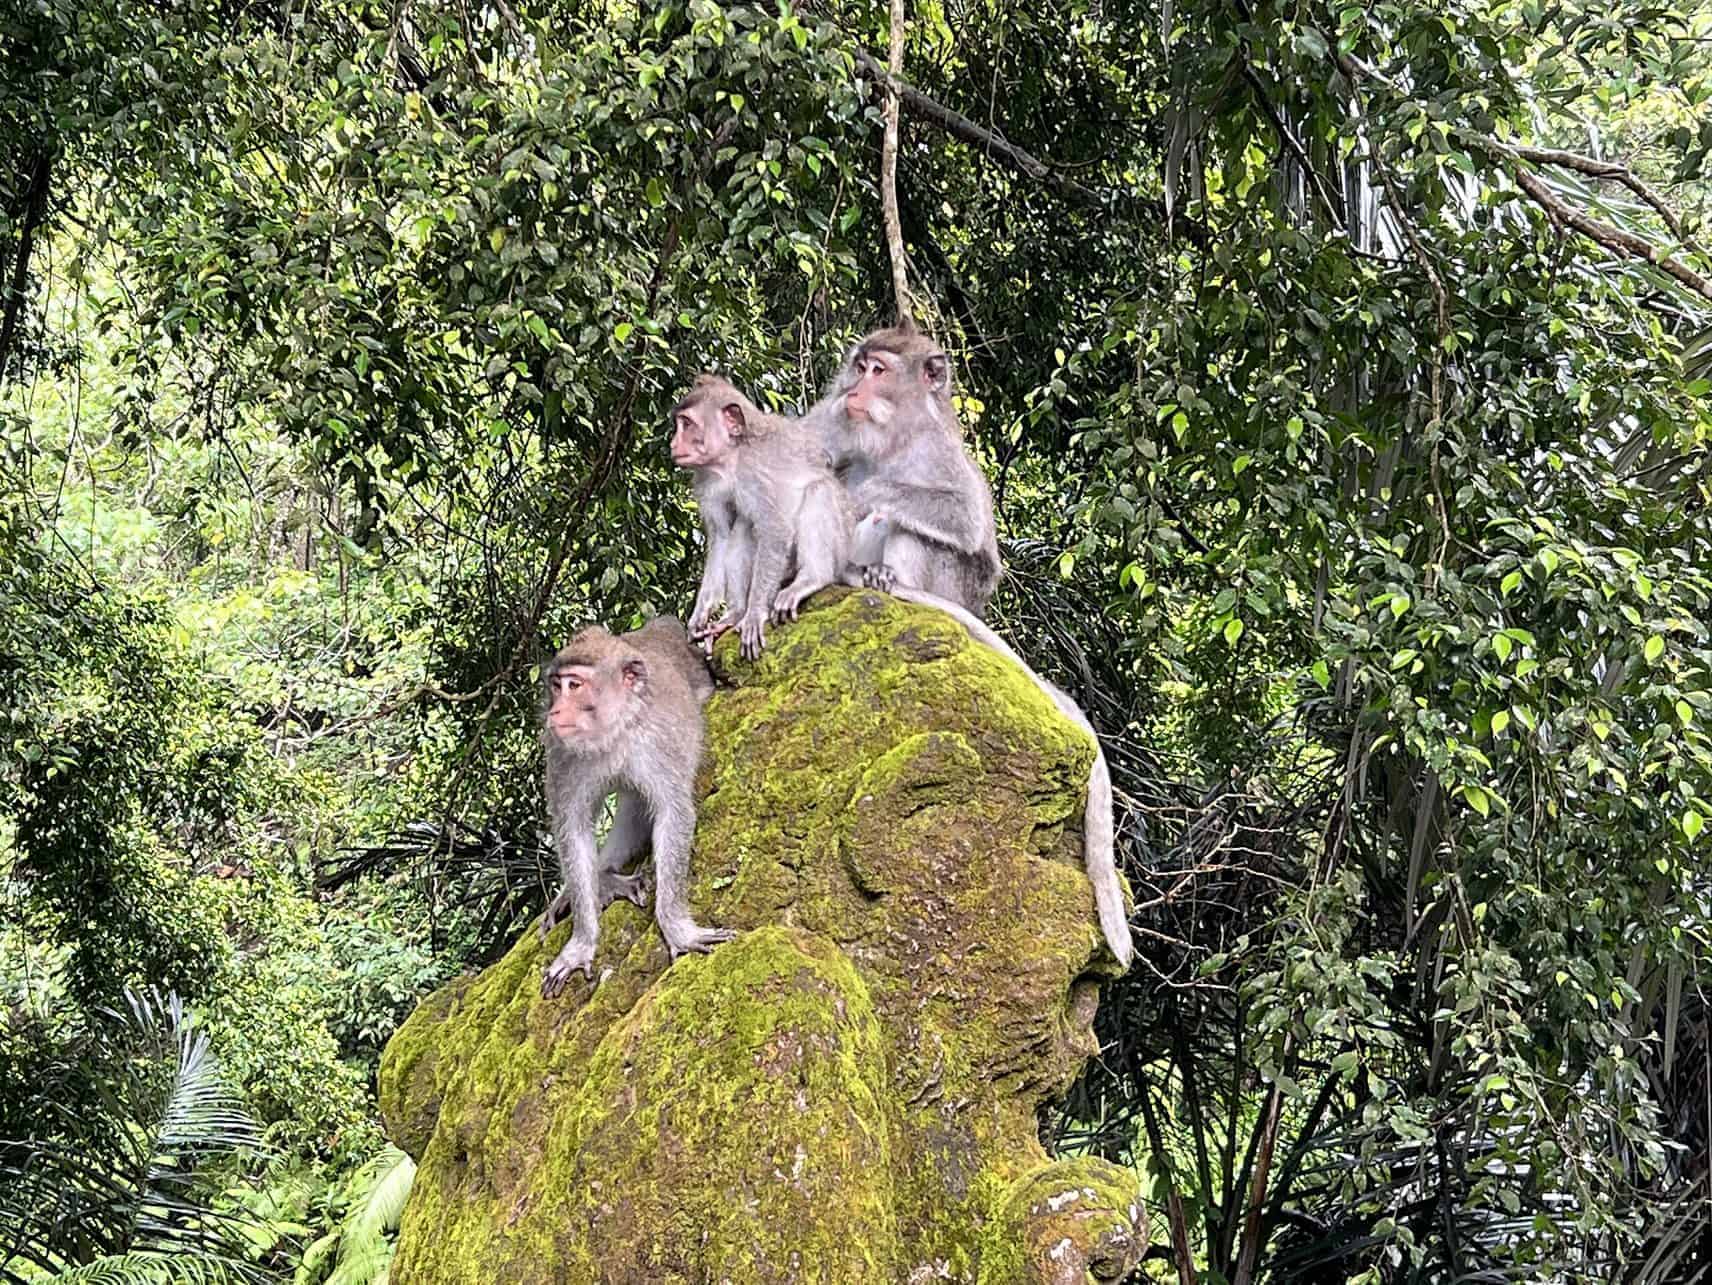 Monkey forest in Bali, Indonesia